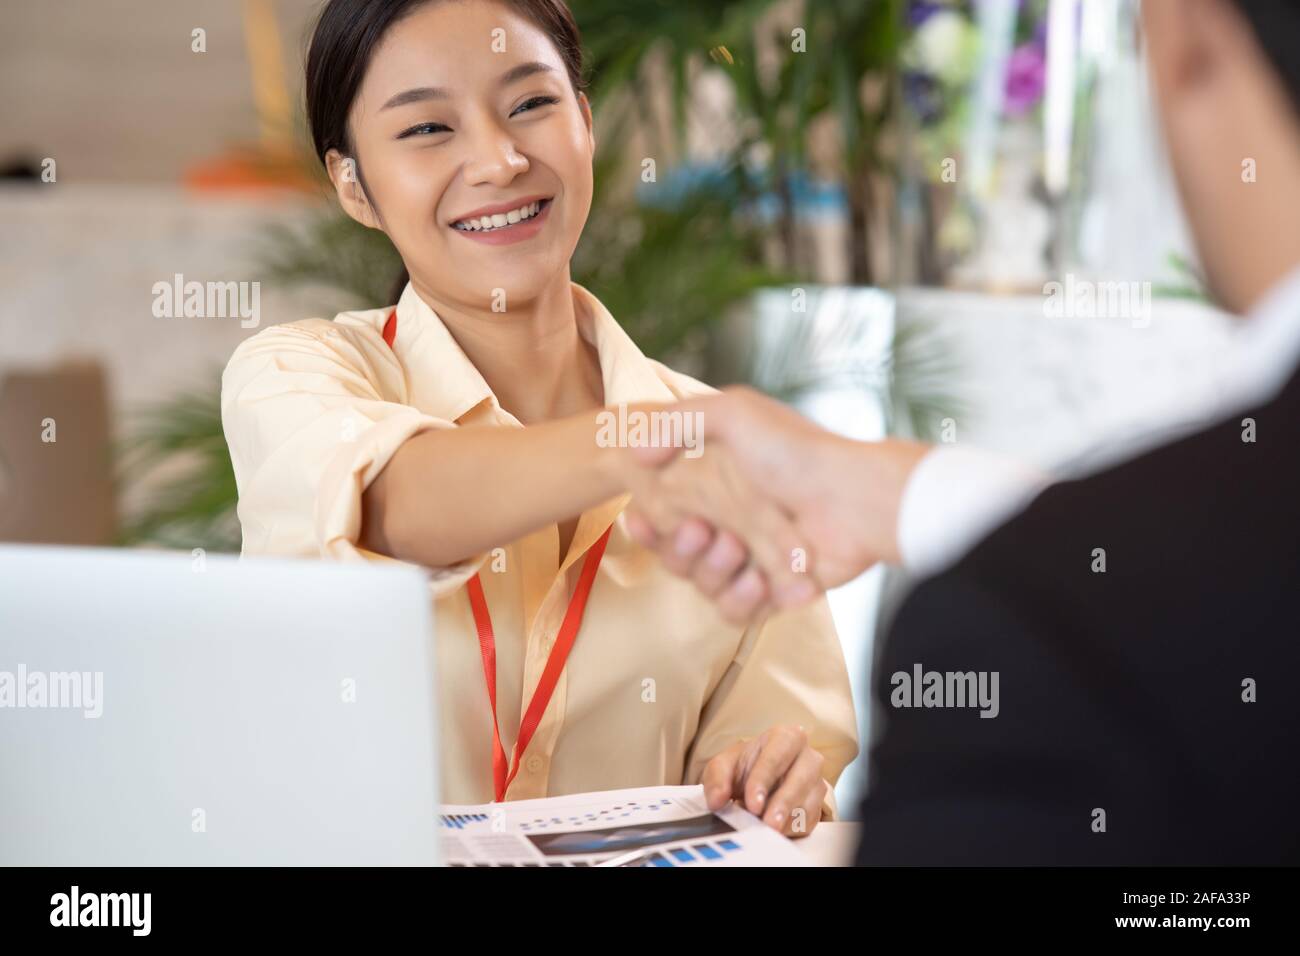 Portrait young Asian woman interviewer and interviewee shaking hands for a job interview .Business people handshake in modern office. Greeting deal co Stock Photo